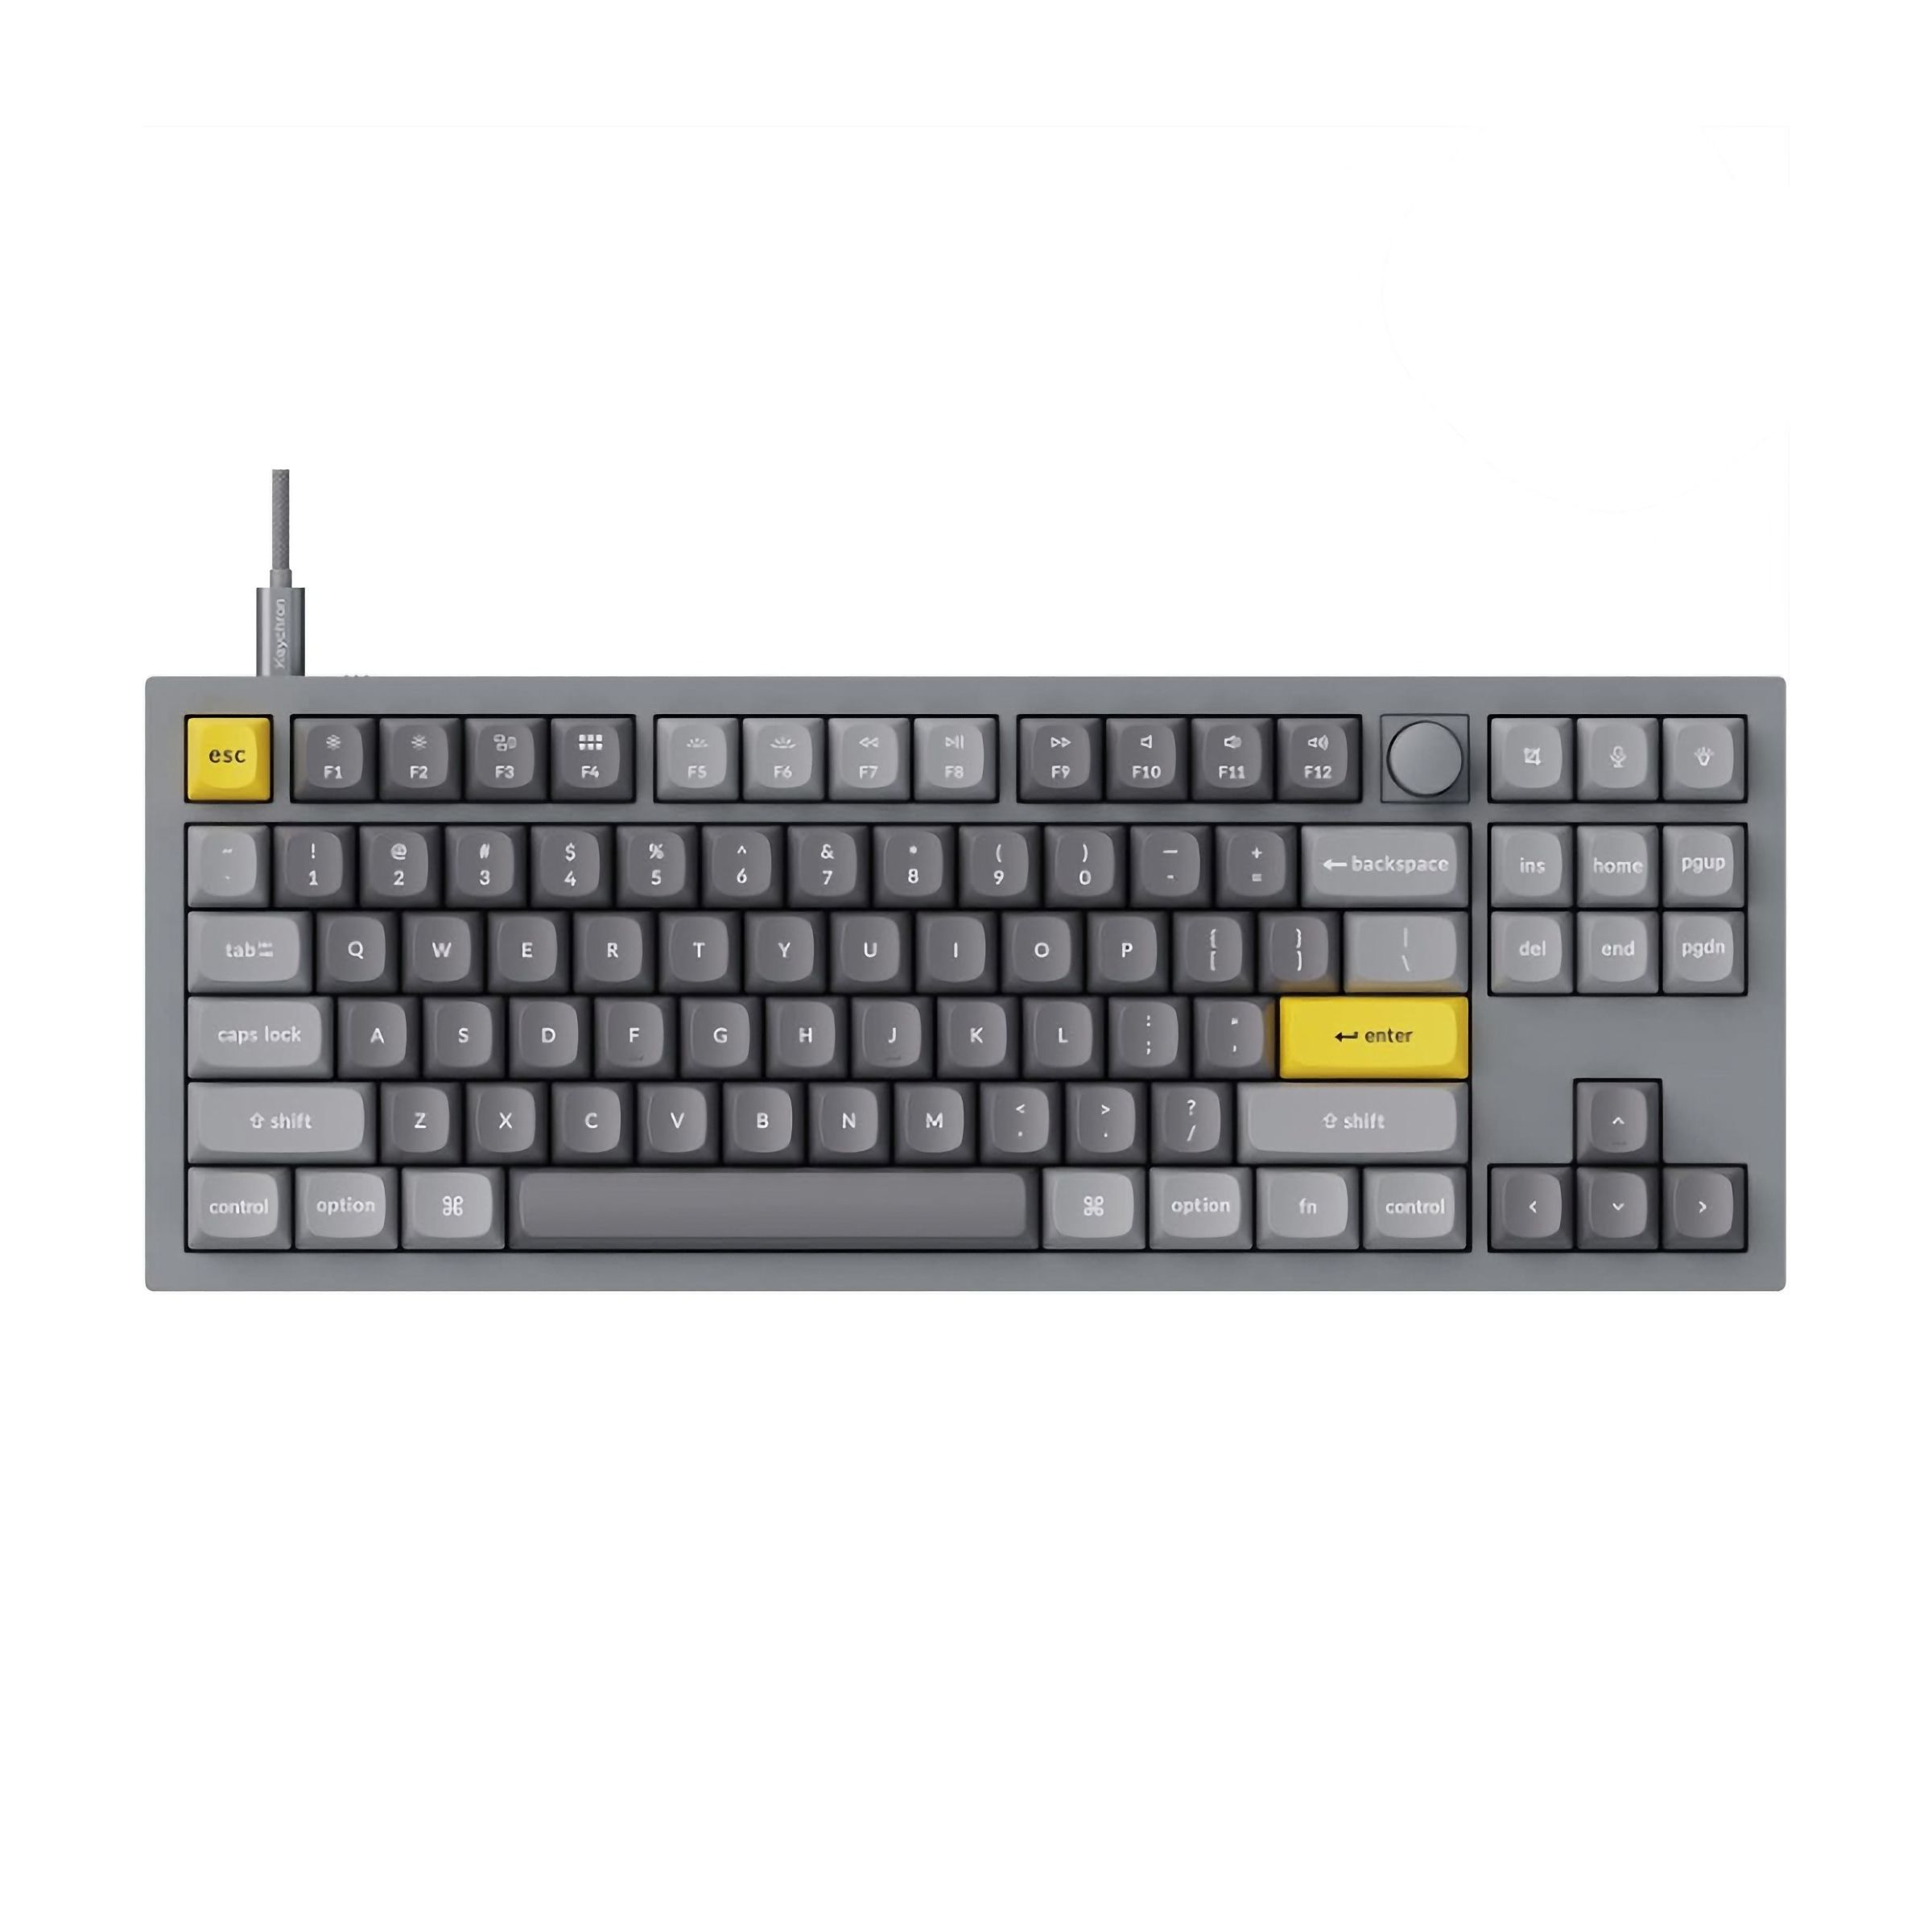 A mechanical keyboard with an aluminum frame and grey and yellow keys.